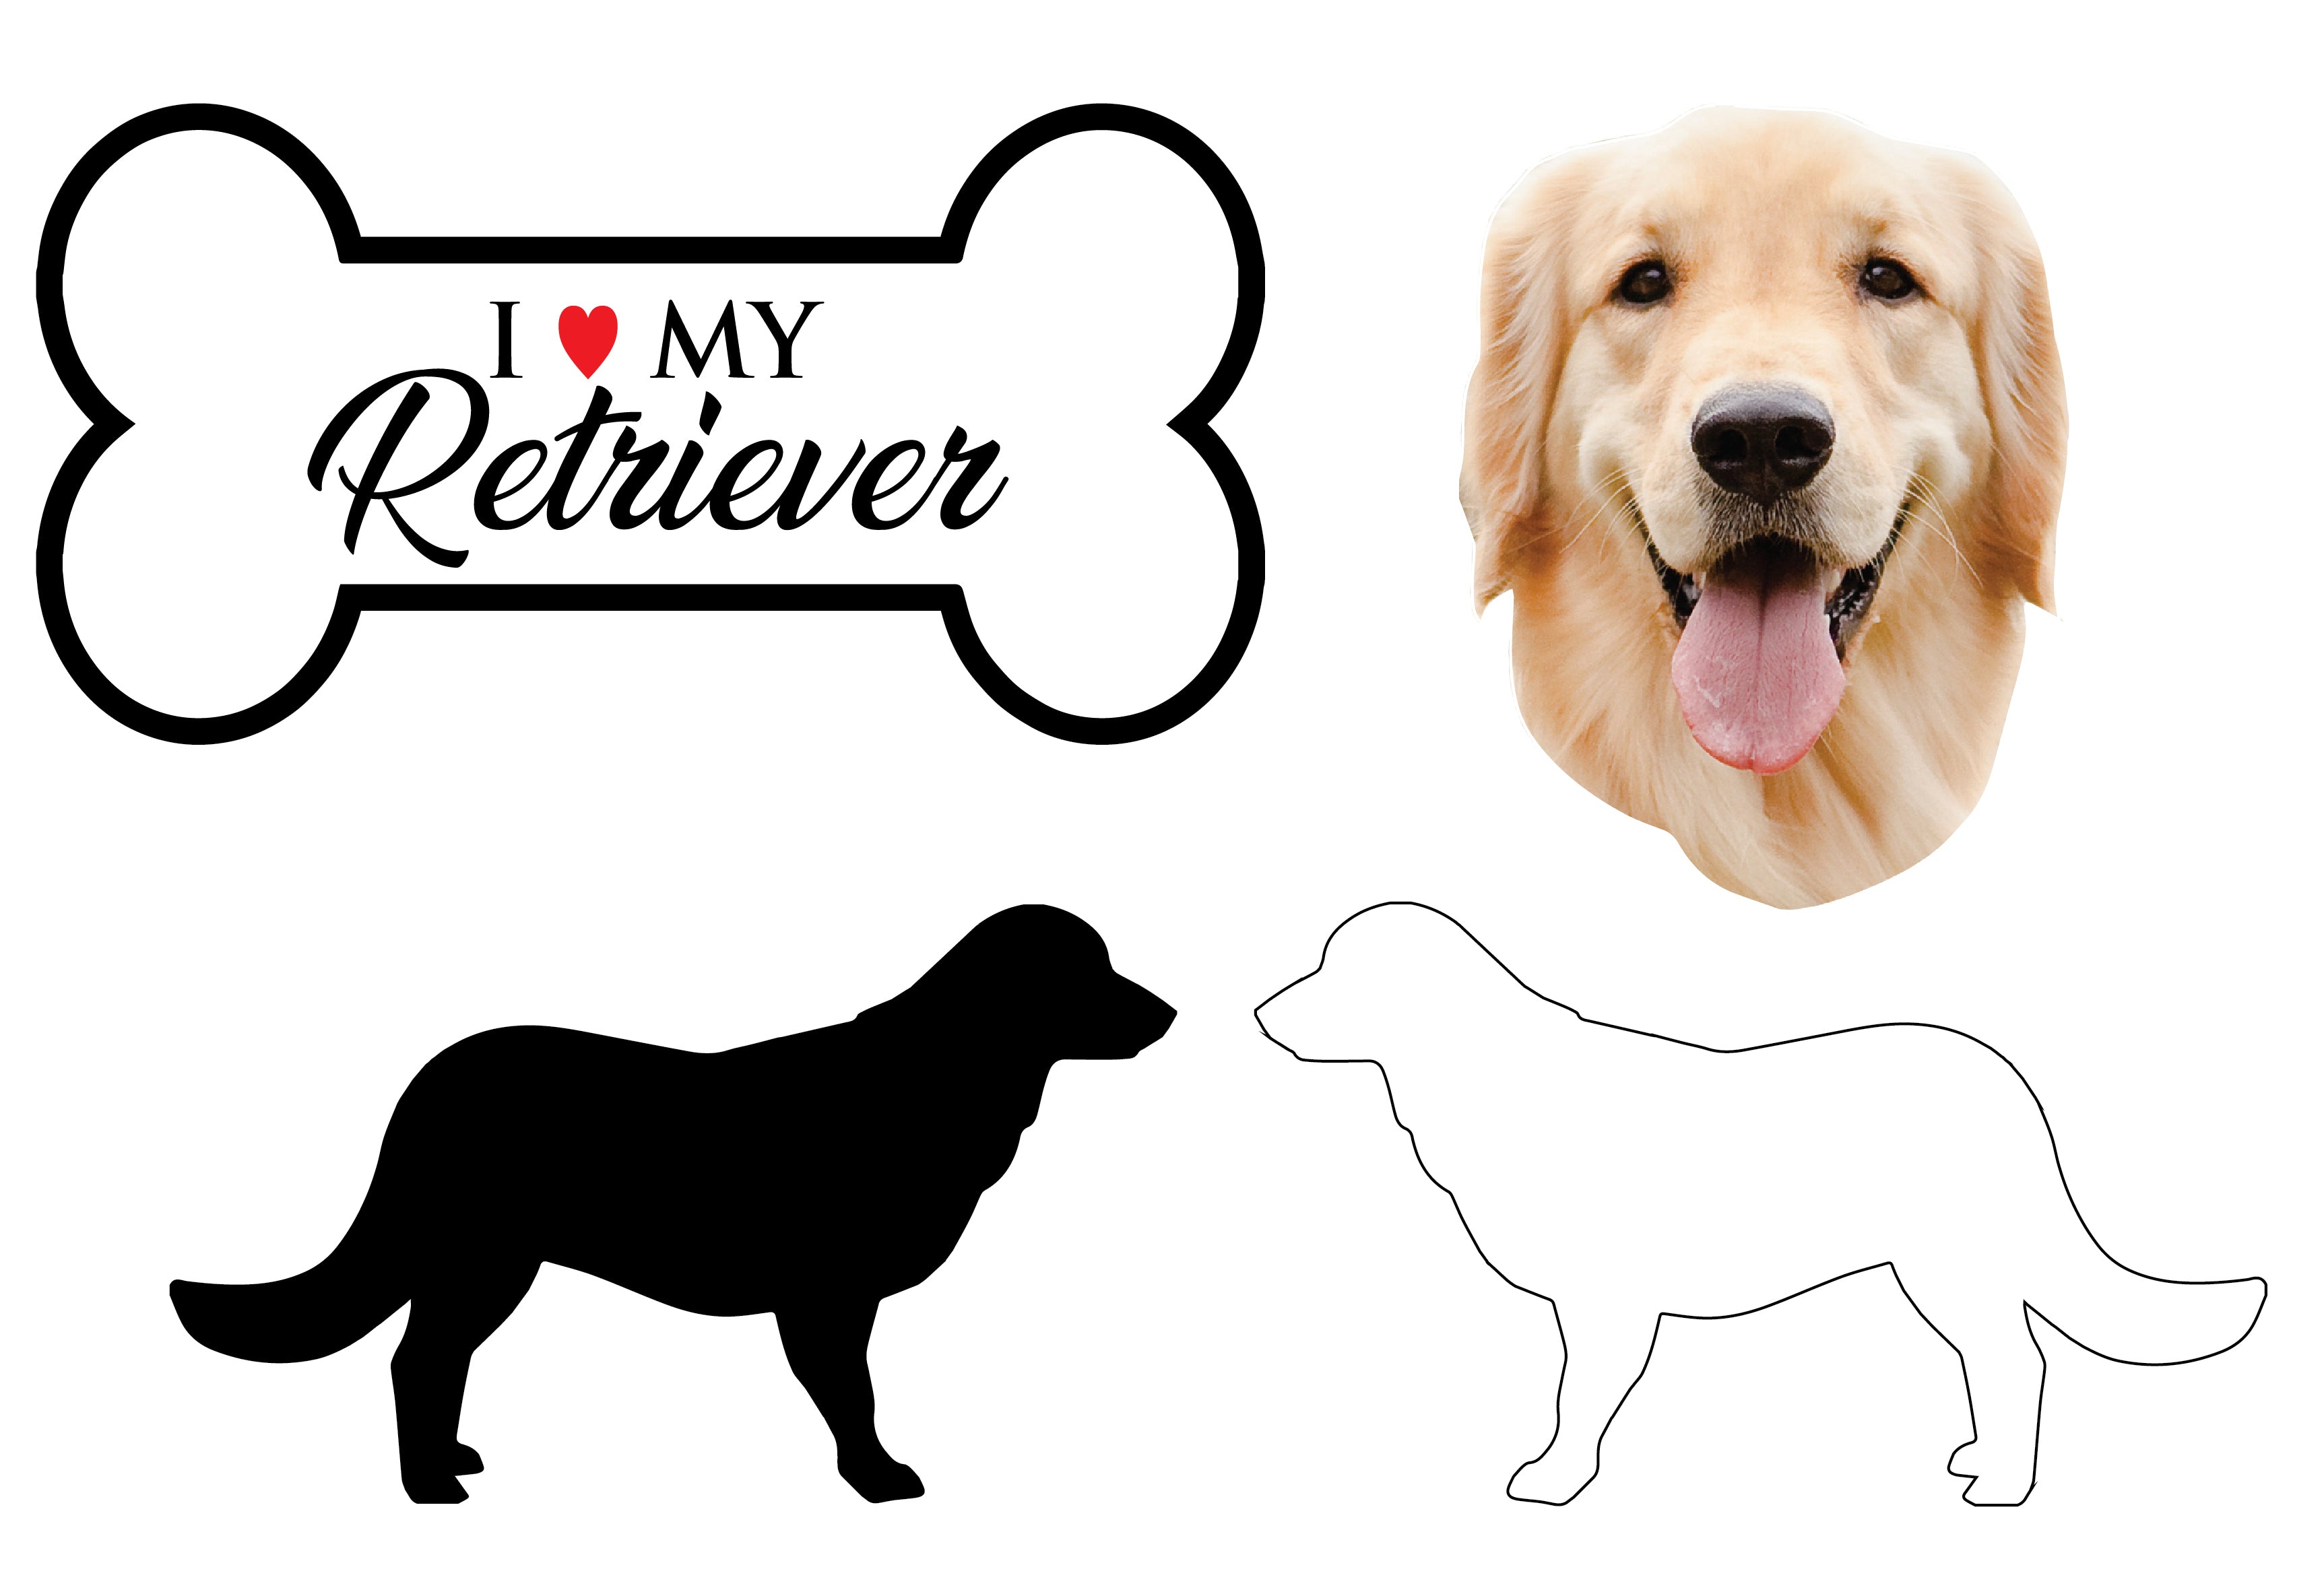 Retriever - Dog Breed Decals (Set of 16) - Sizes in Description